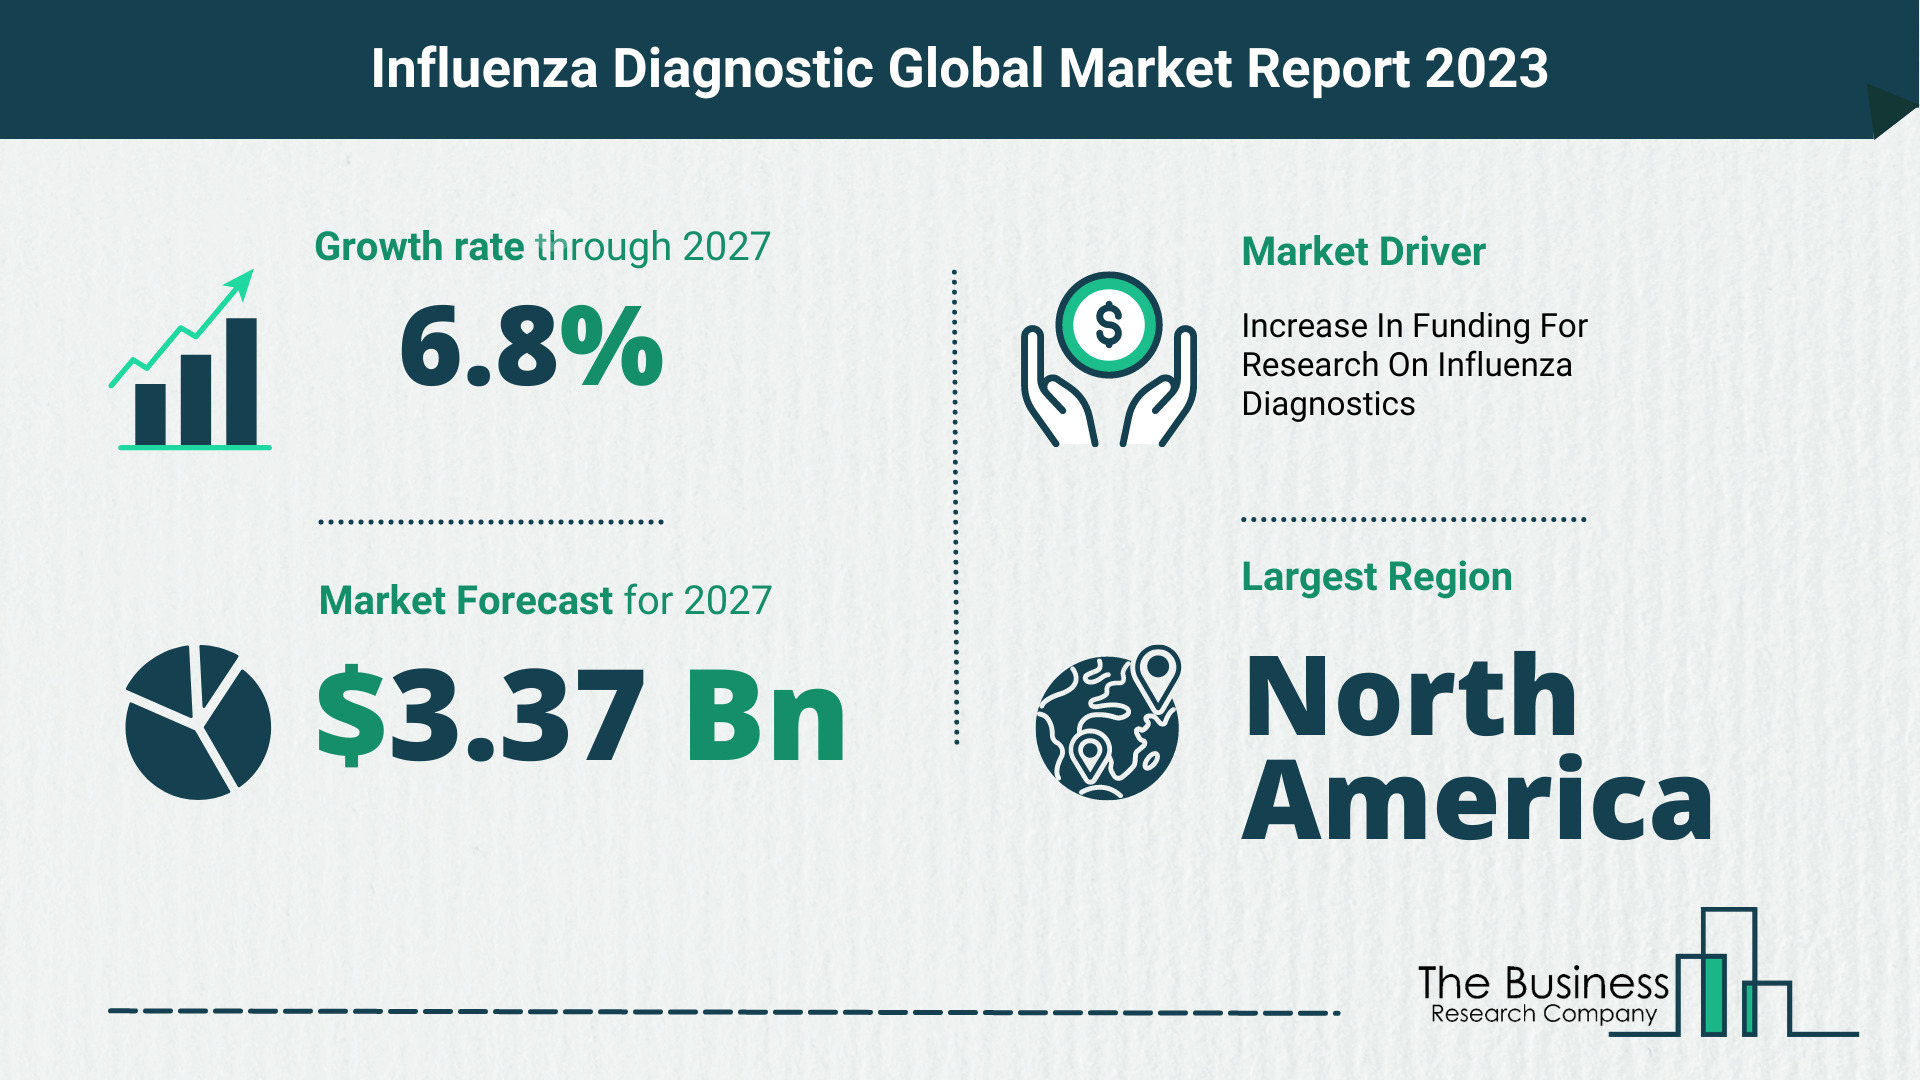 Influenza Diagnostic Market Size, Share, And Growth Rate Analysis 2023